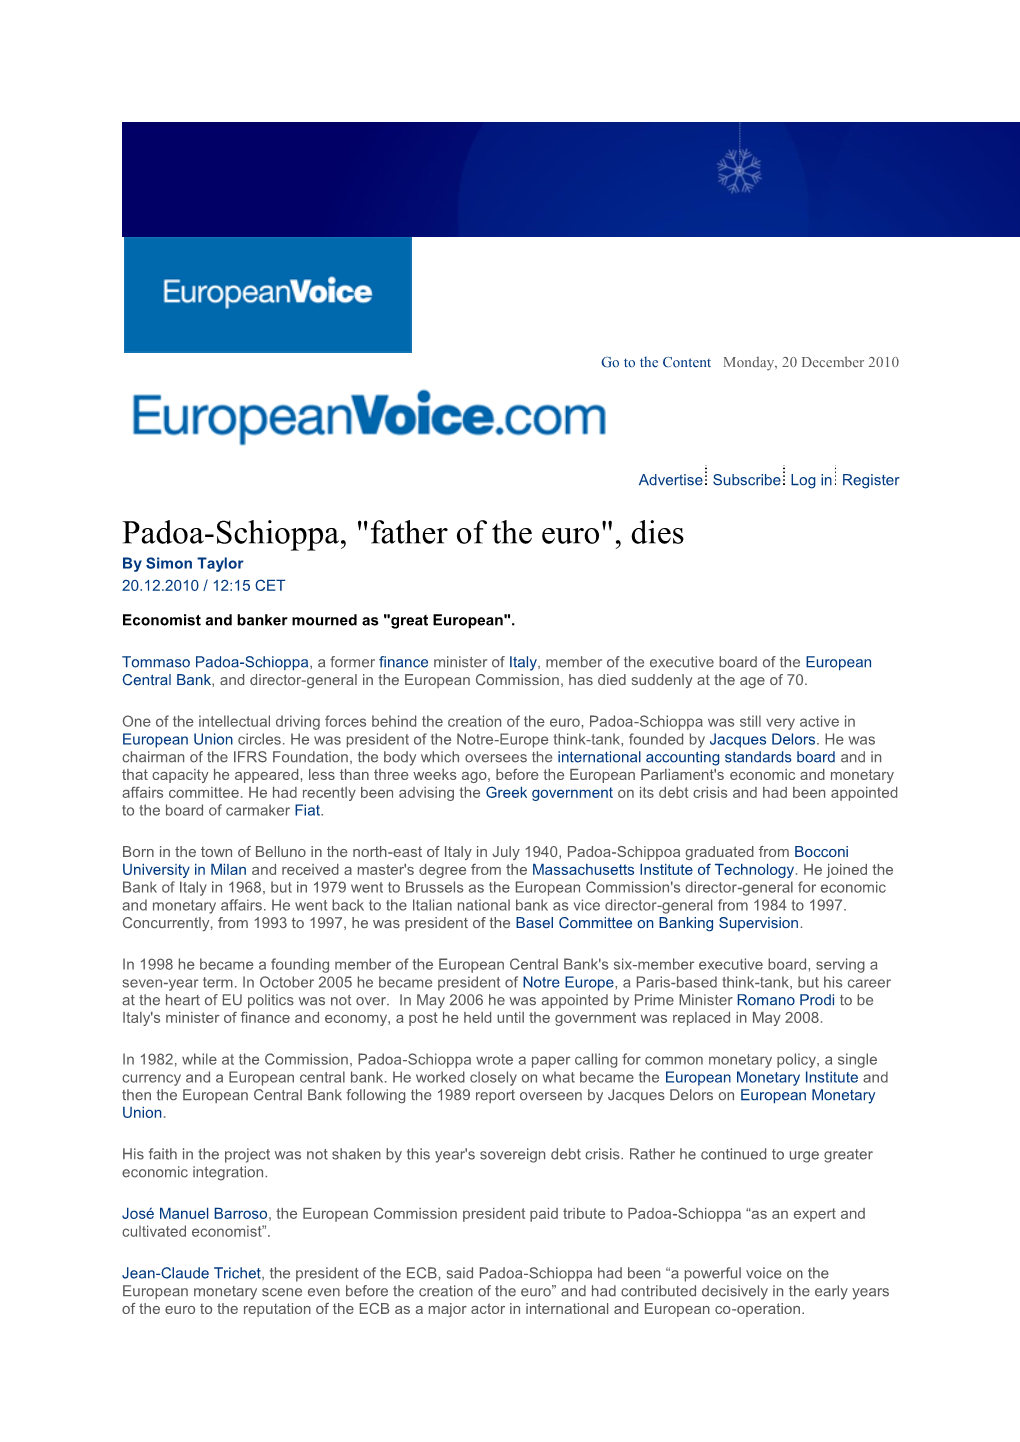 Padoa-Schioppa, "Father of the Euro", Dies by Simon Taylor 20.12.2010 / 12:15 CET